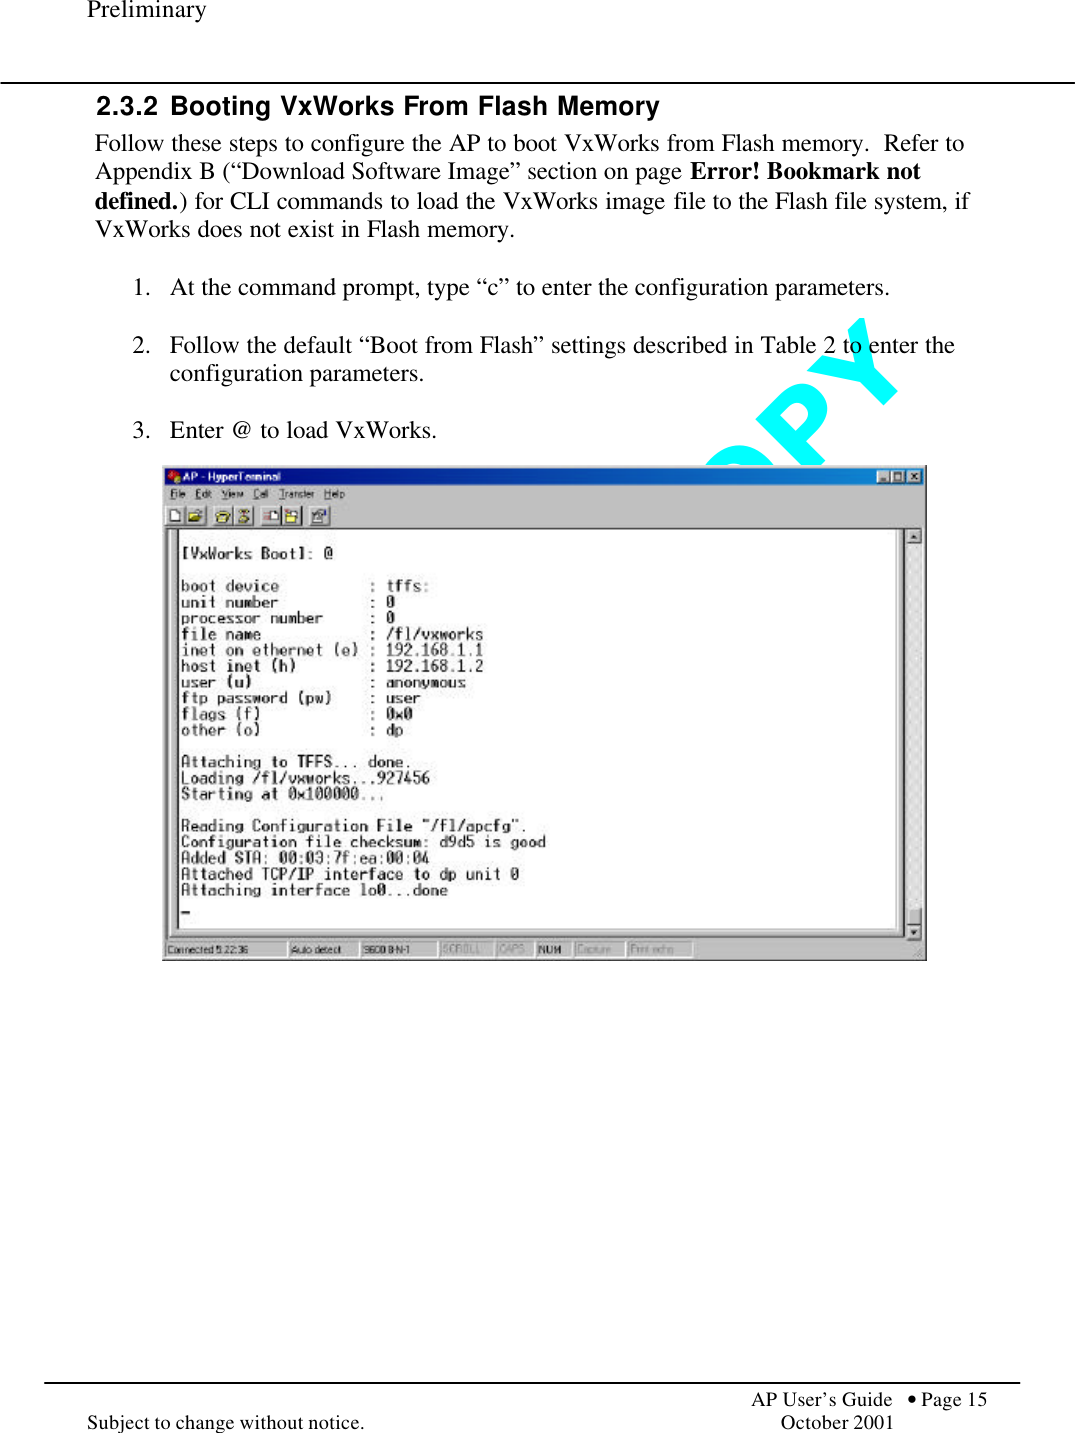 D O   N O T   C O P Y  Preliminary            AP User’s Guide  • Page 15 Subject to change without notice.    October 2001 2.3.2 Booting VxWorks From Flash Memory Follow these steps to configure the AP to boot VxWorks from Flash memory.  Refer to Appendix B (“Download Software Image” section on page Error! Bookmark not defined.) for CLI commands to load the VxWorks image file to the Flash file system, if VxWorks does not exist in Flash memory.  1.  At the command prompt, type “c” to enter the configuration parameters.  2.  Follow the default “Boot from Flash” settings described in Table 2 to enter the configuration parameters.  3.  Enter @ to load VxWorks.   